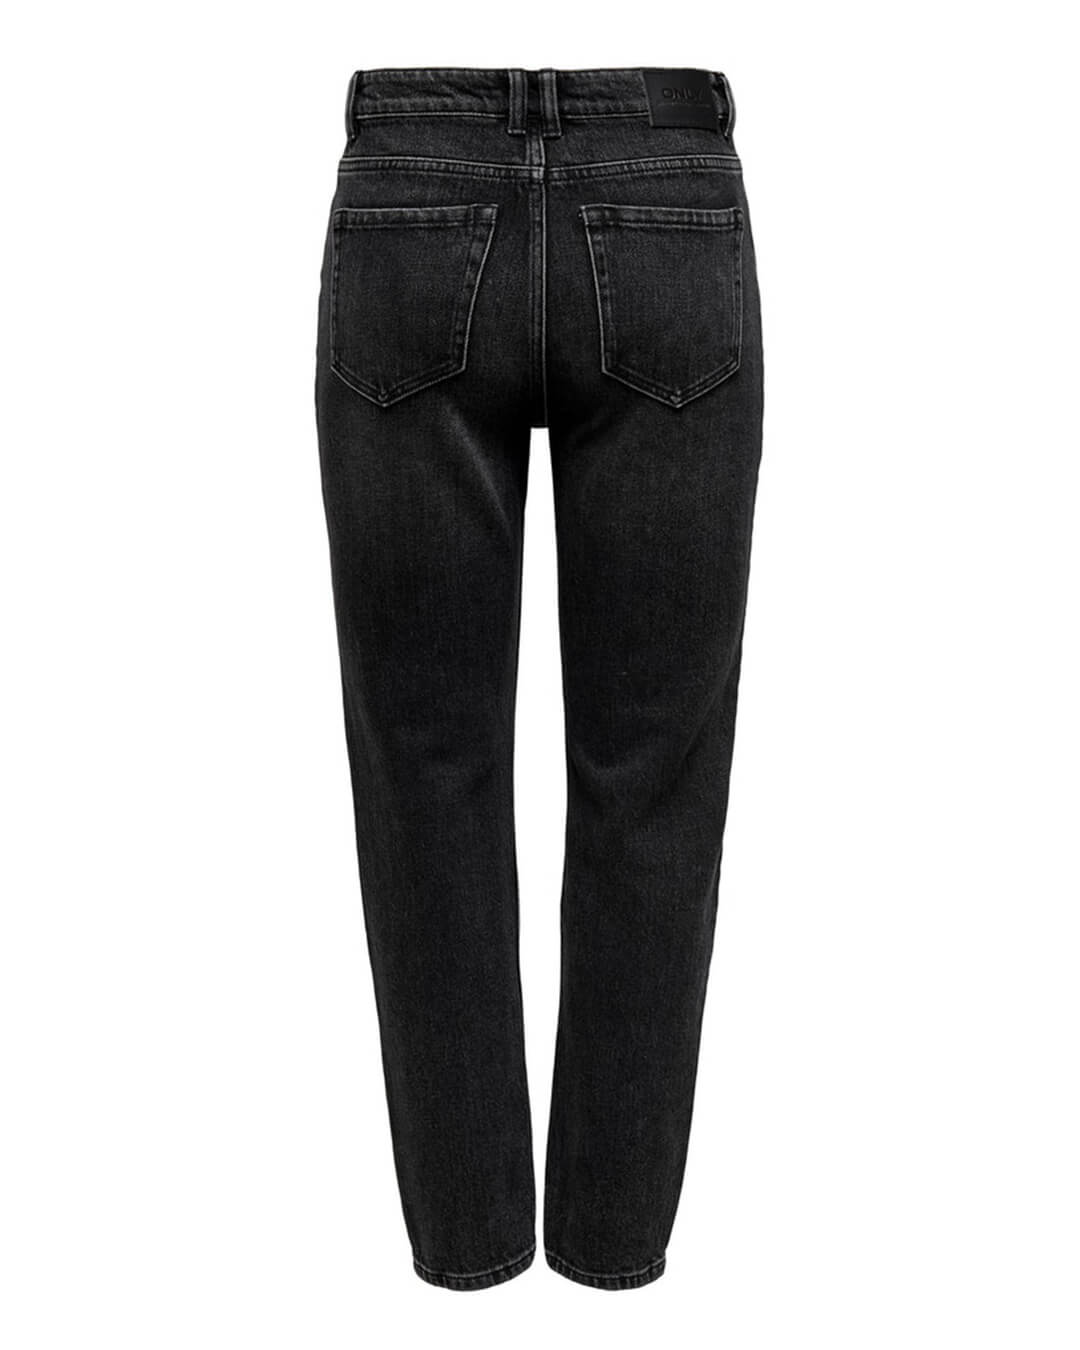 Only Jeans Only Emily Straight Ankle Black Denim Jeans